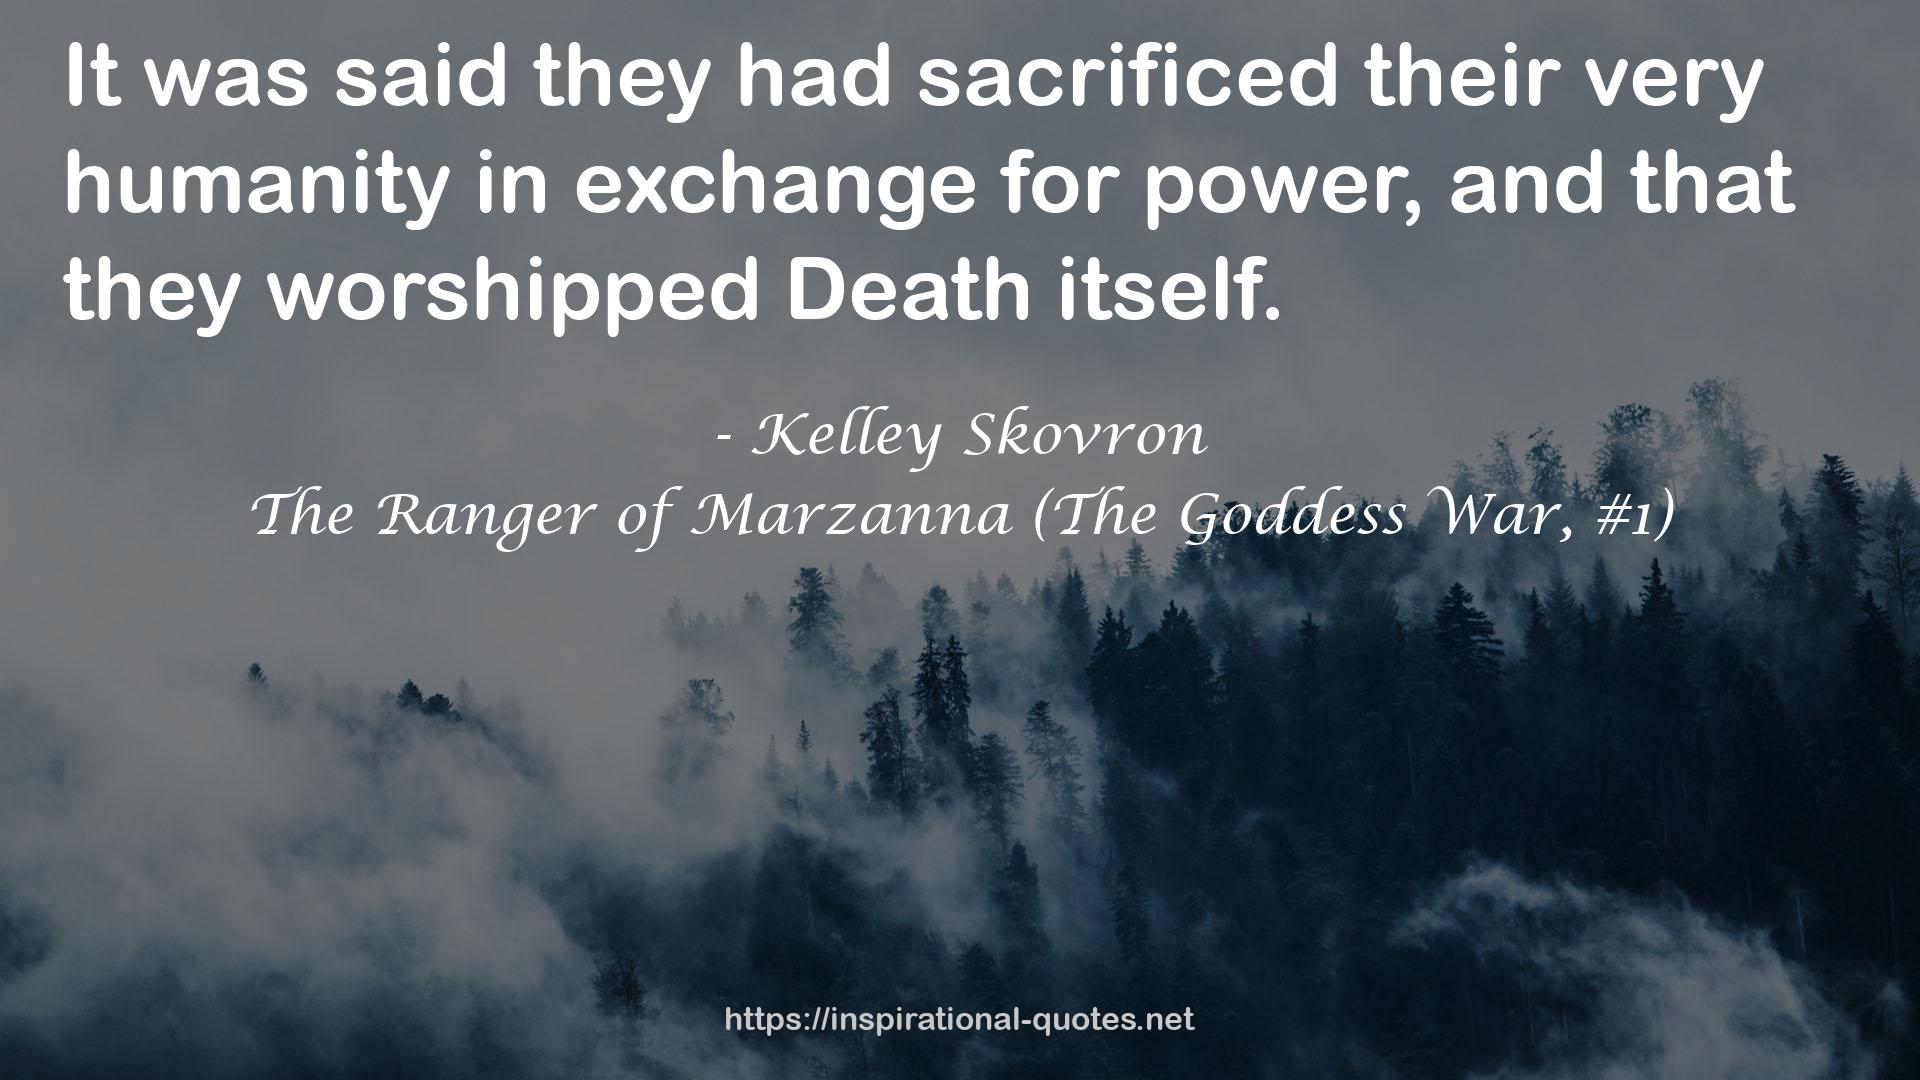 The Ranger of Marzanna (The Goddess War, #1) QUOTES